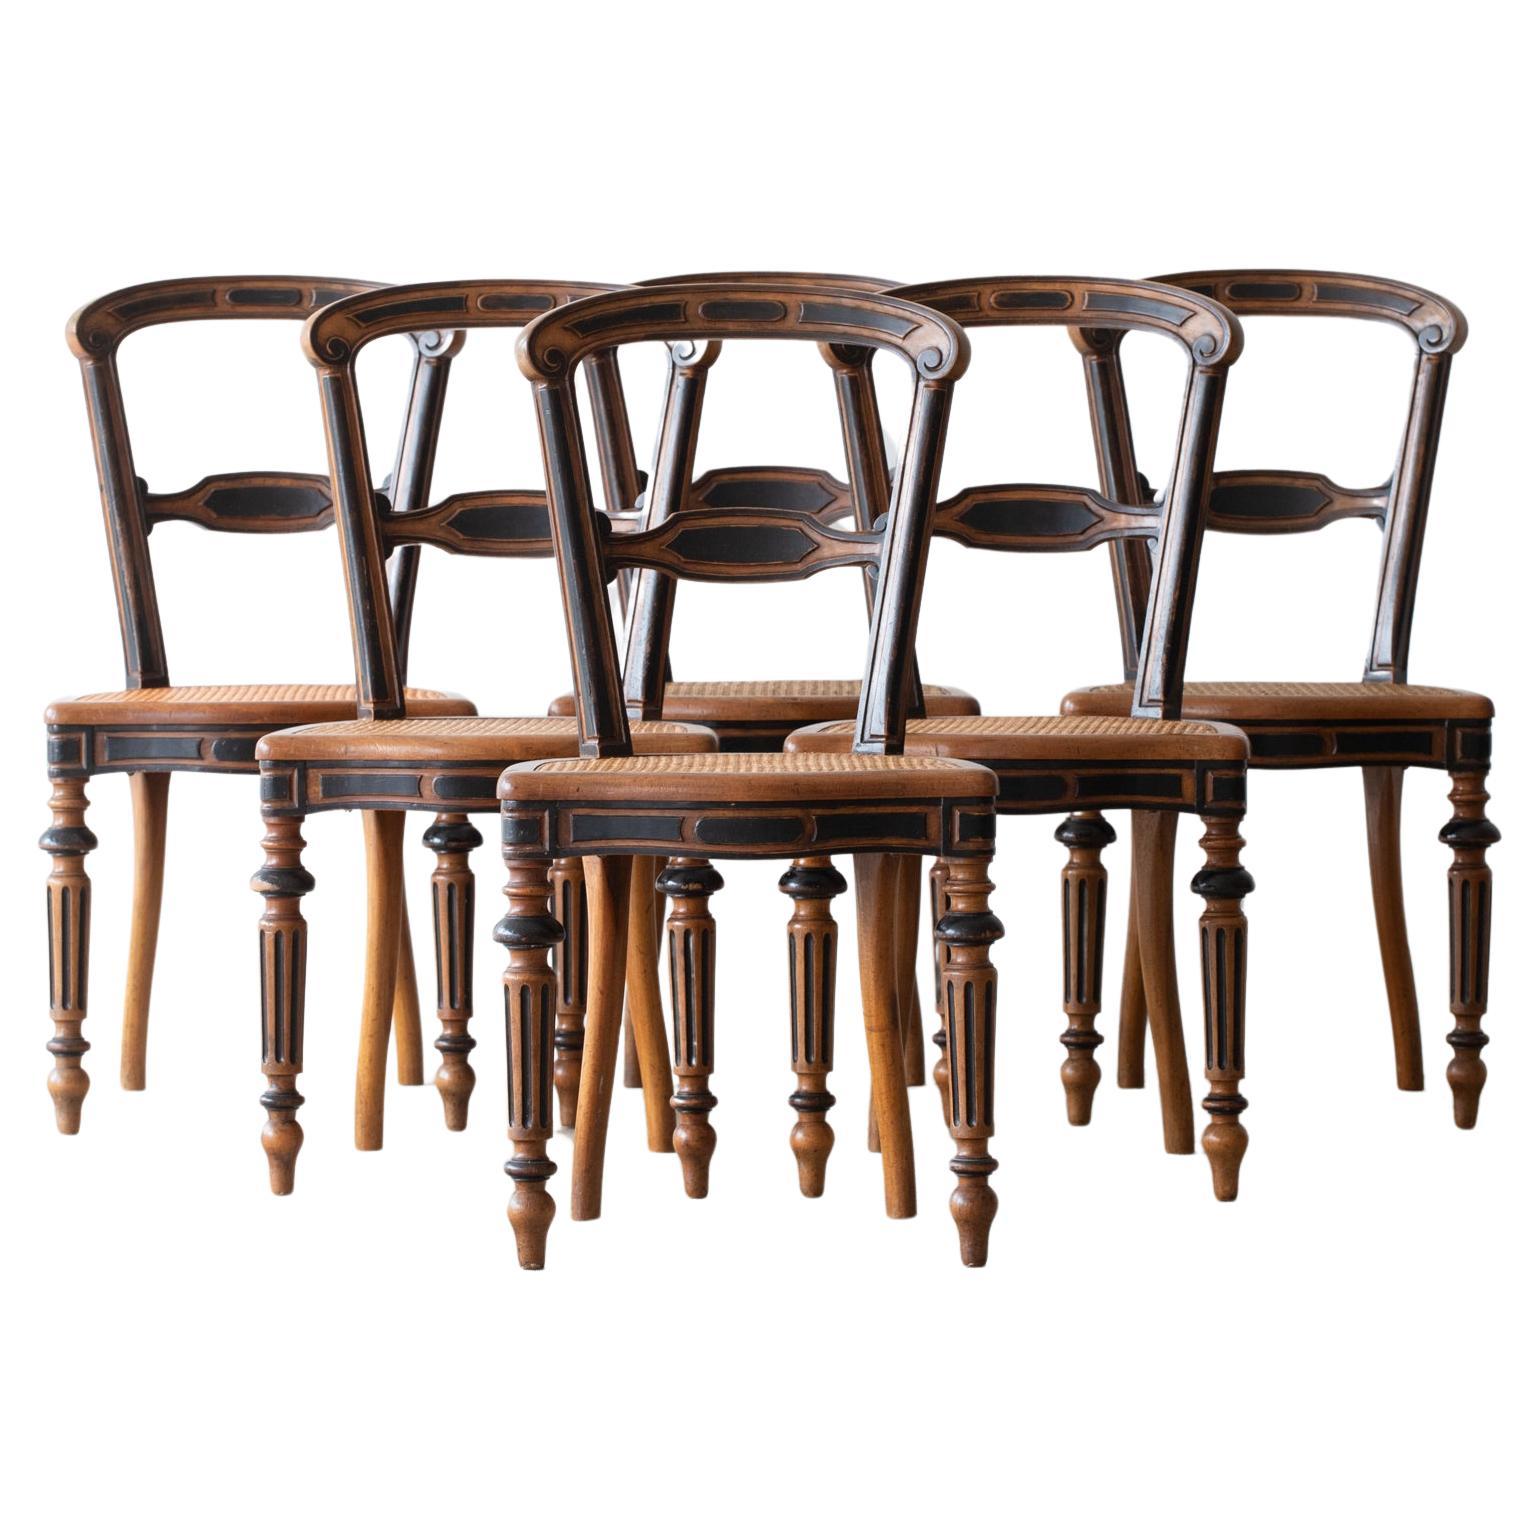 Napoleon III Caned Dining Chairs, French Late 19th Century